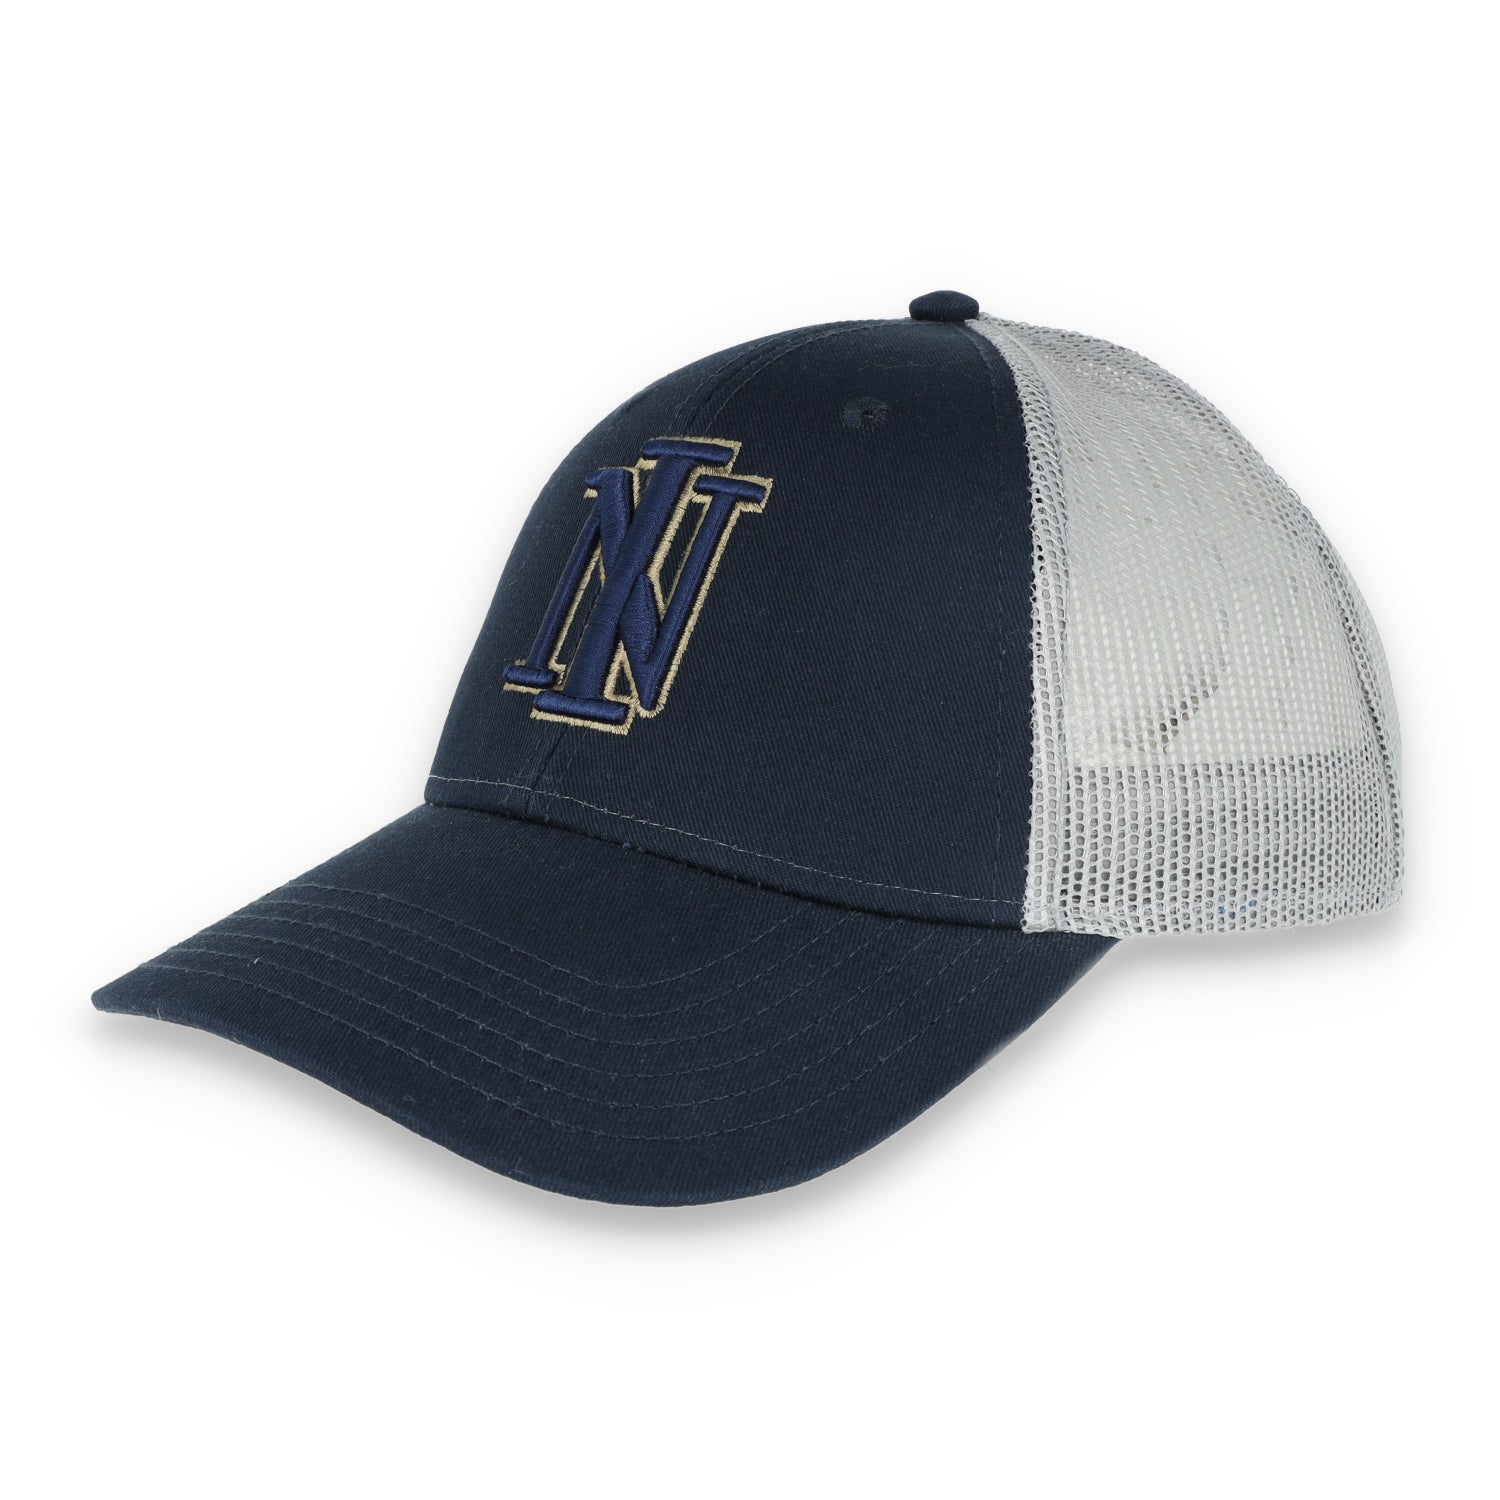 Napa High Indians Low Profile Trucker with Modified Flat Bill Cap-Navy/GREY